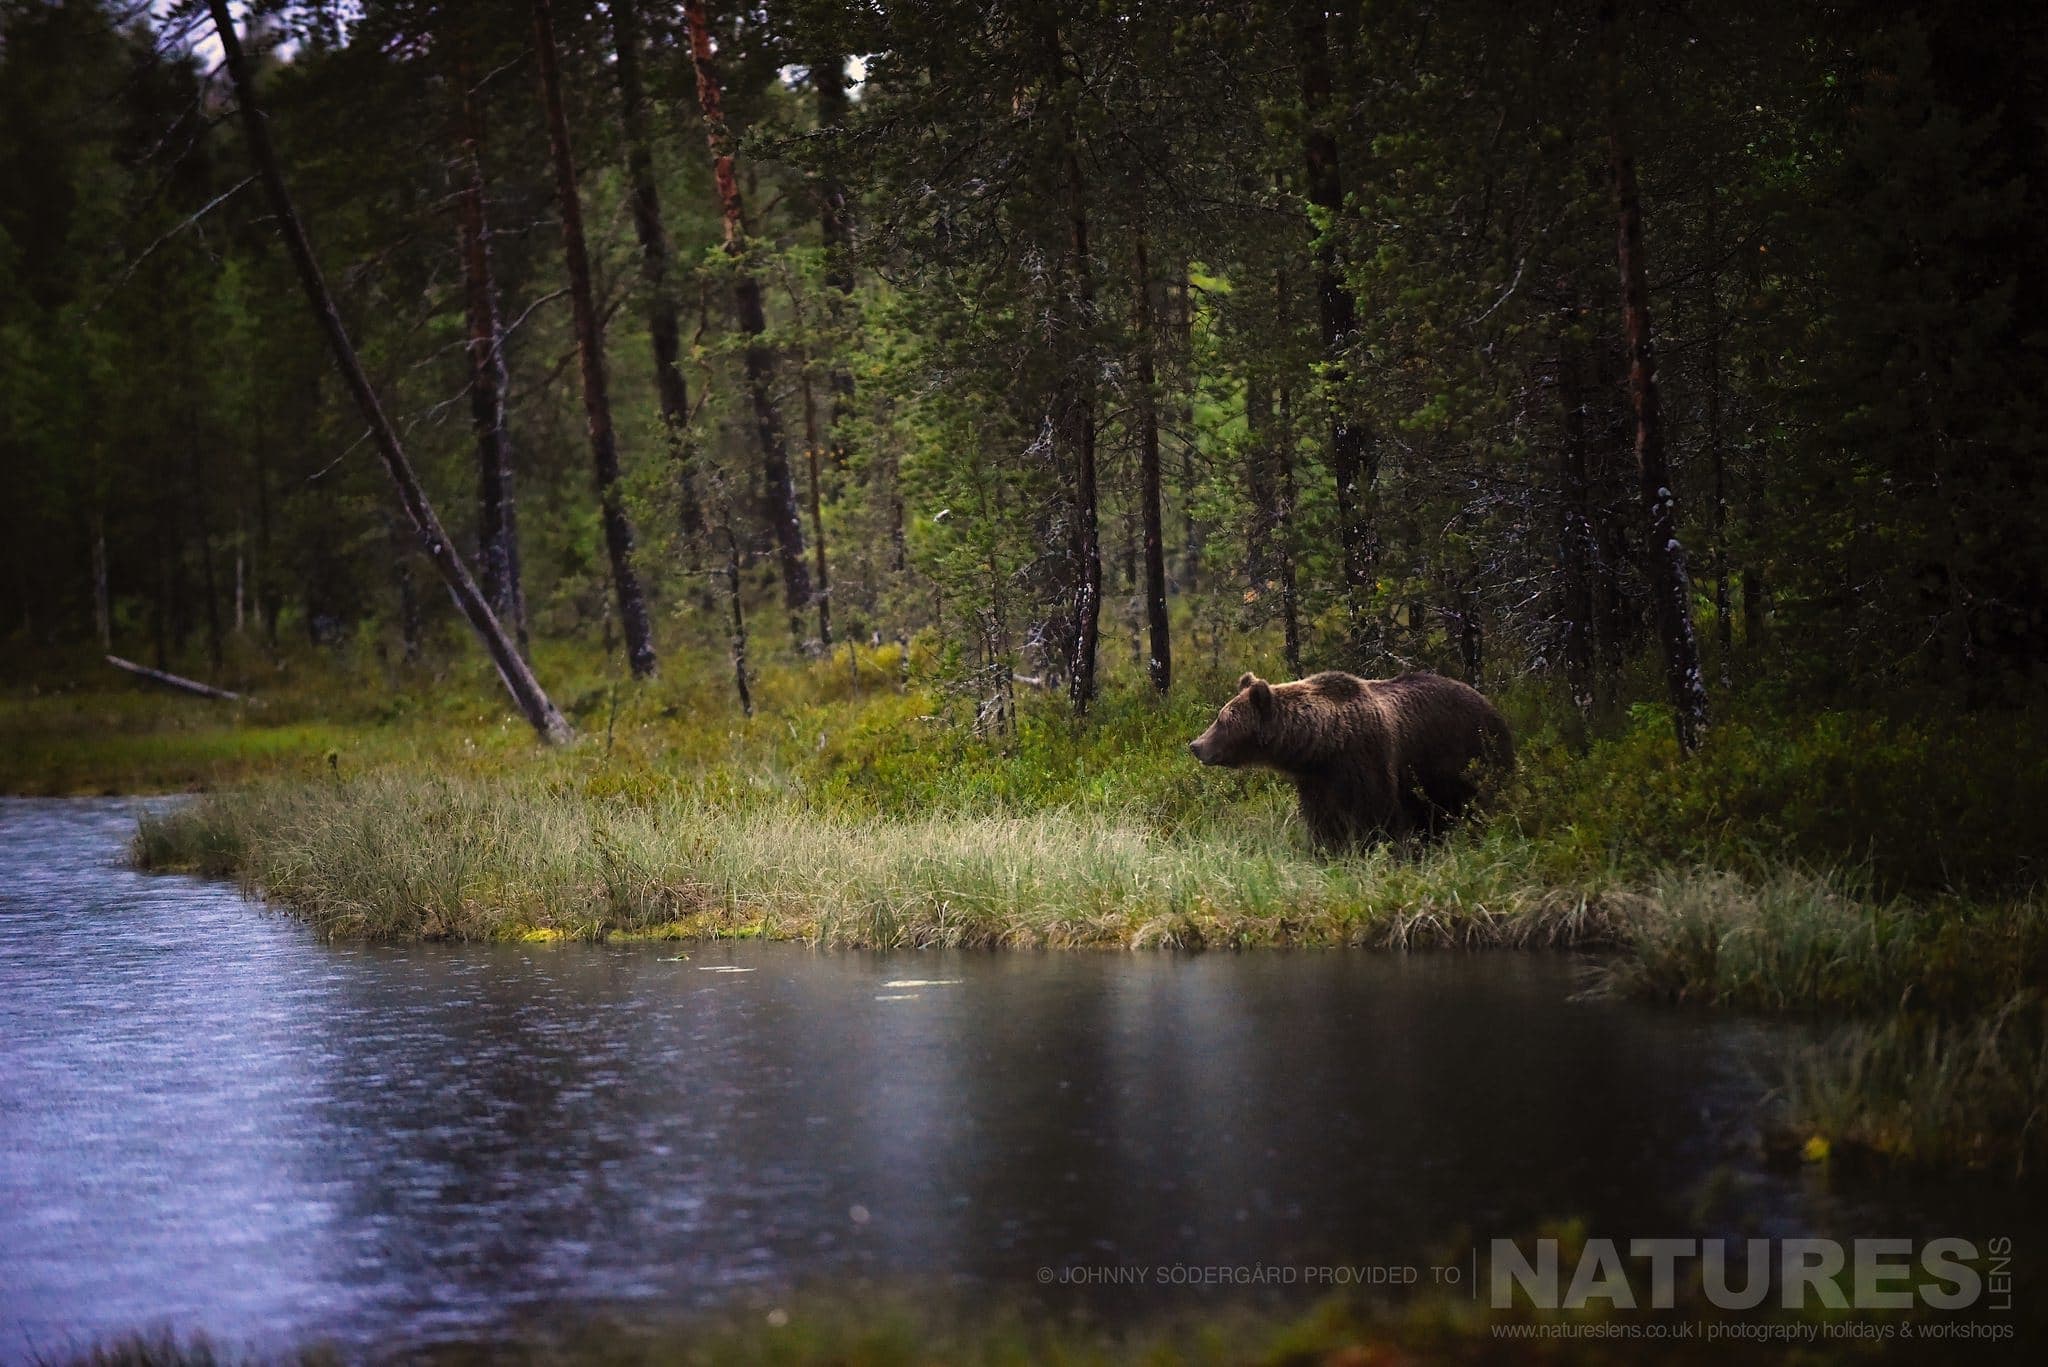 One Of The Large Bears Pauses Alongside The Lake Photographed By Johnny Södergård During The Natureslens Wild Brown Bears Of Finland Photography Holiday